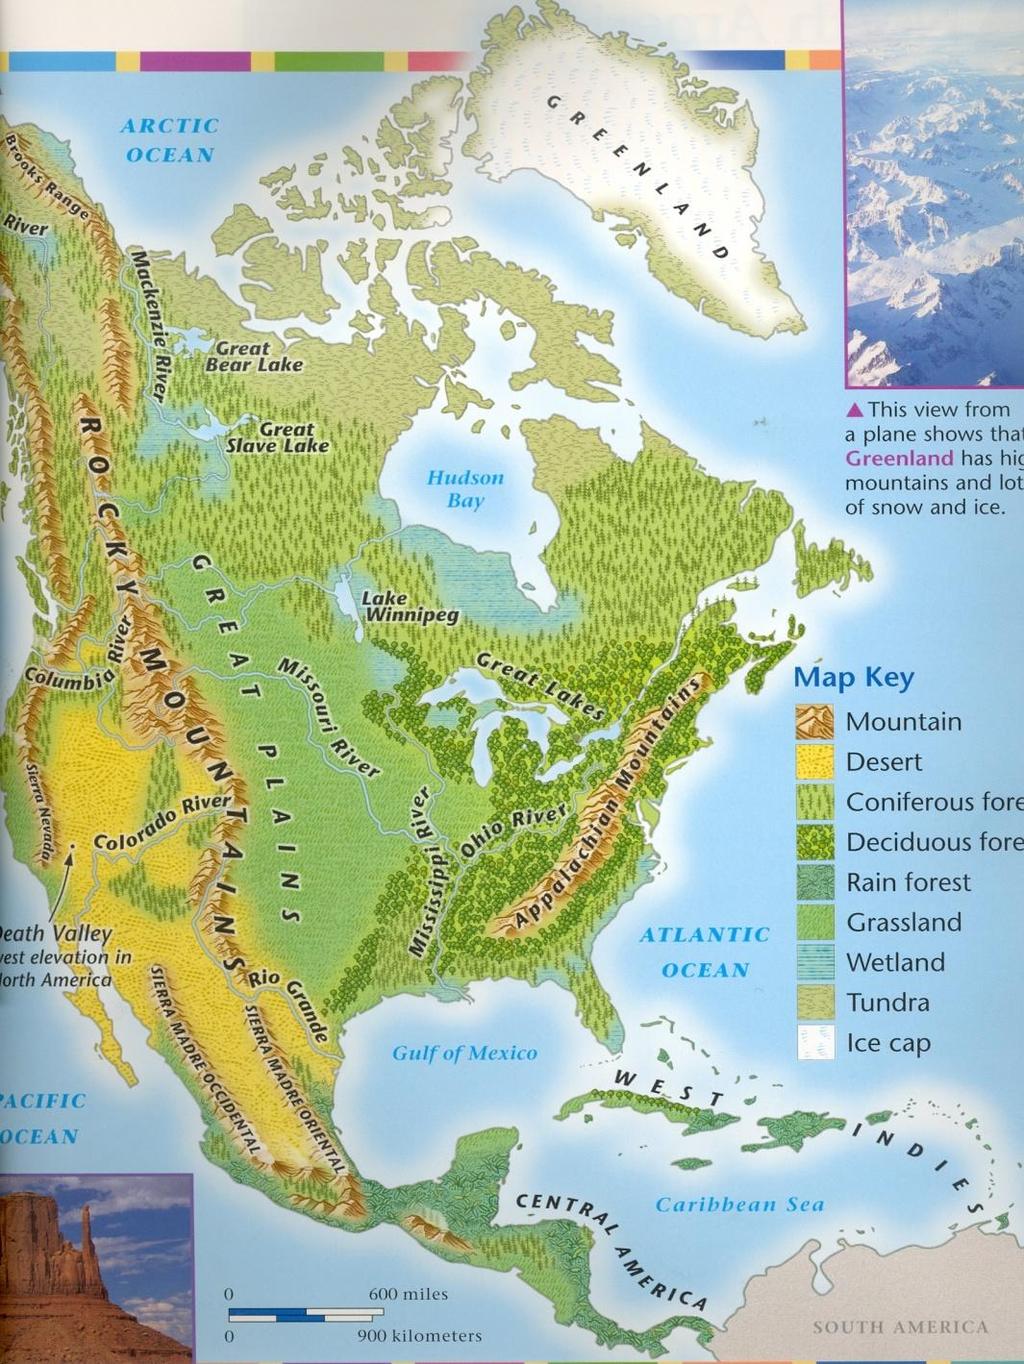 This physical map of North America shows the physical features